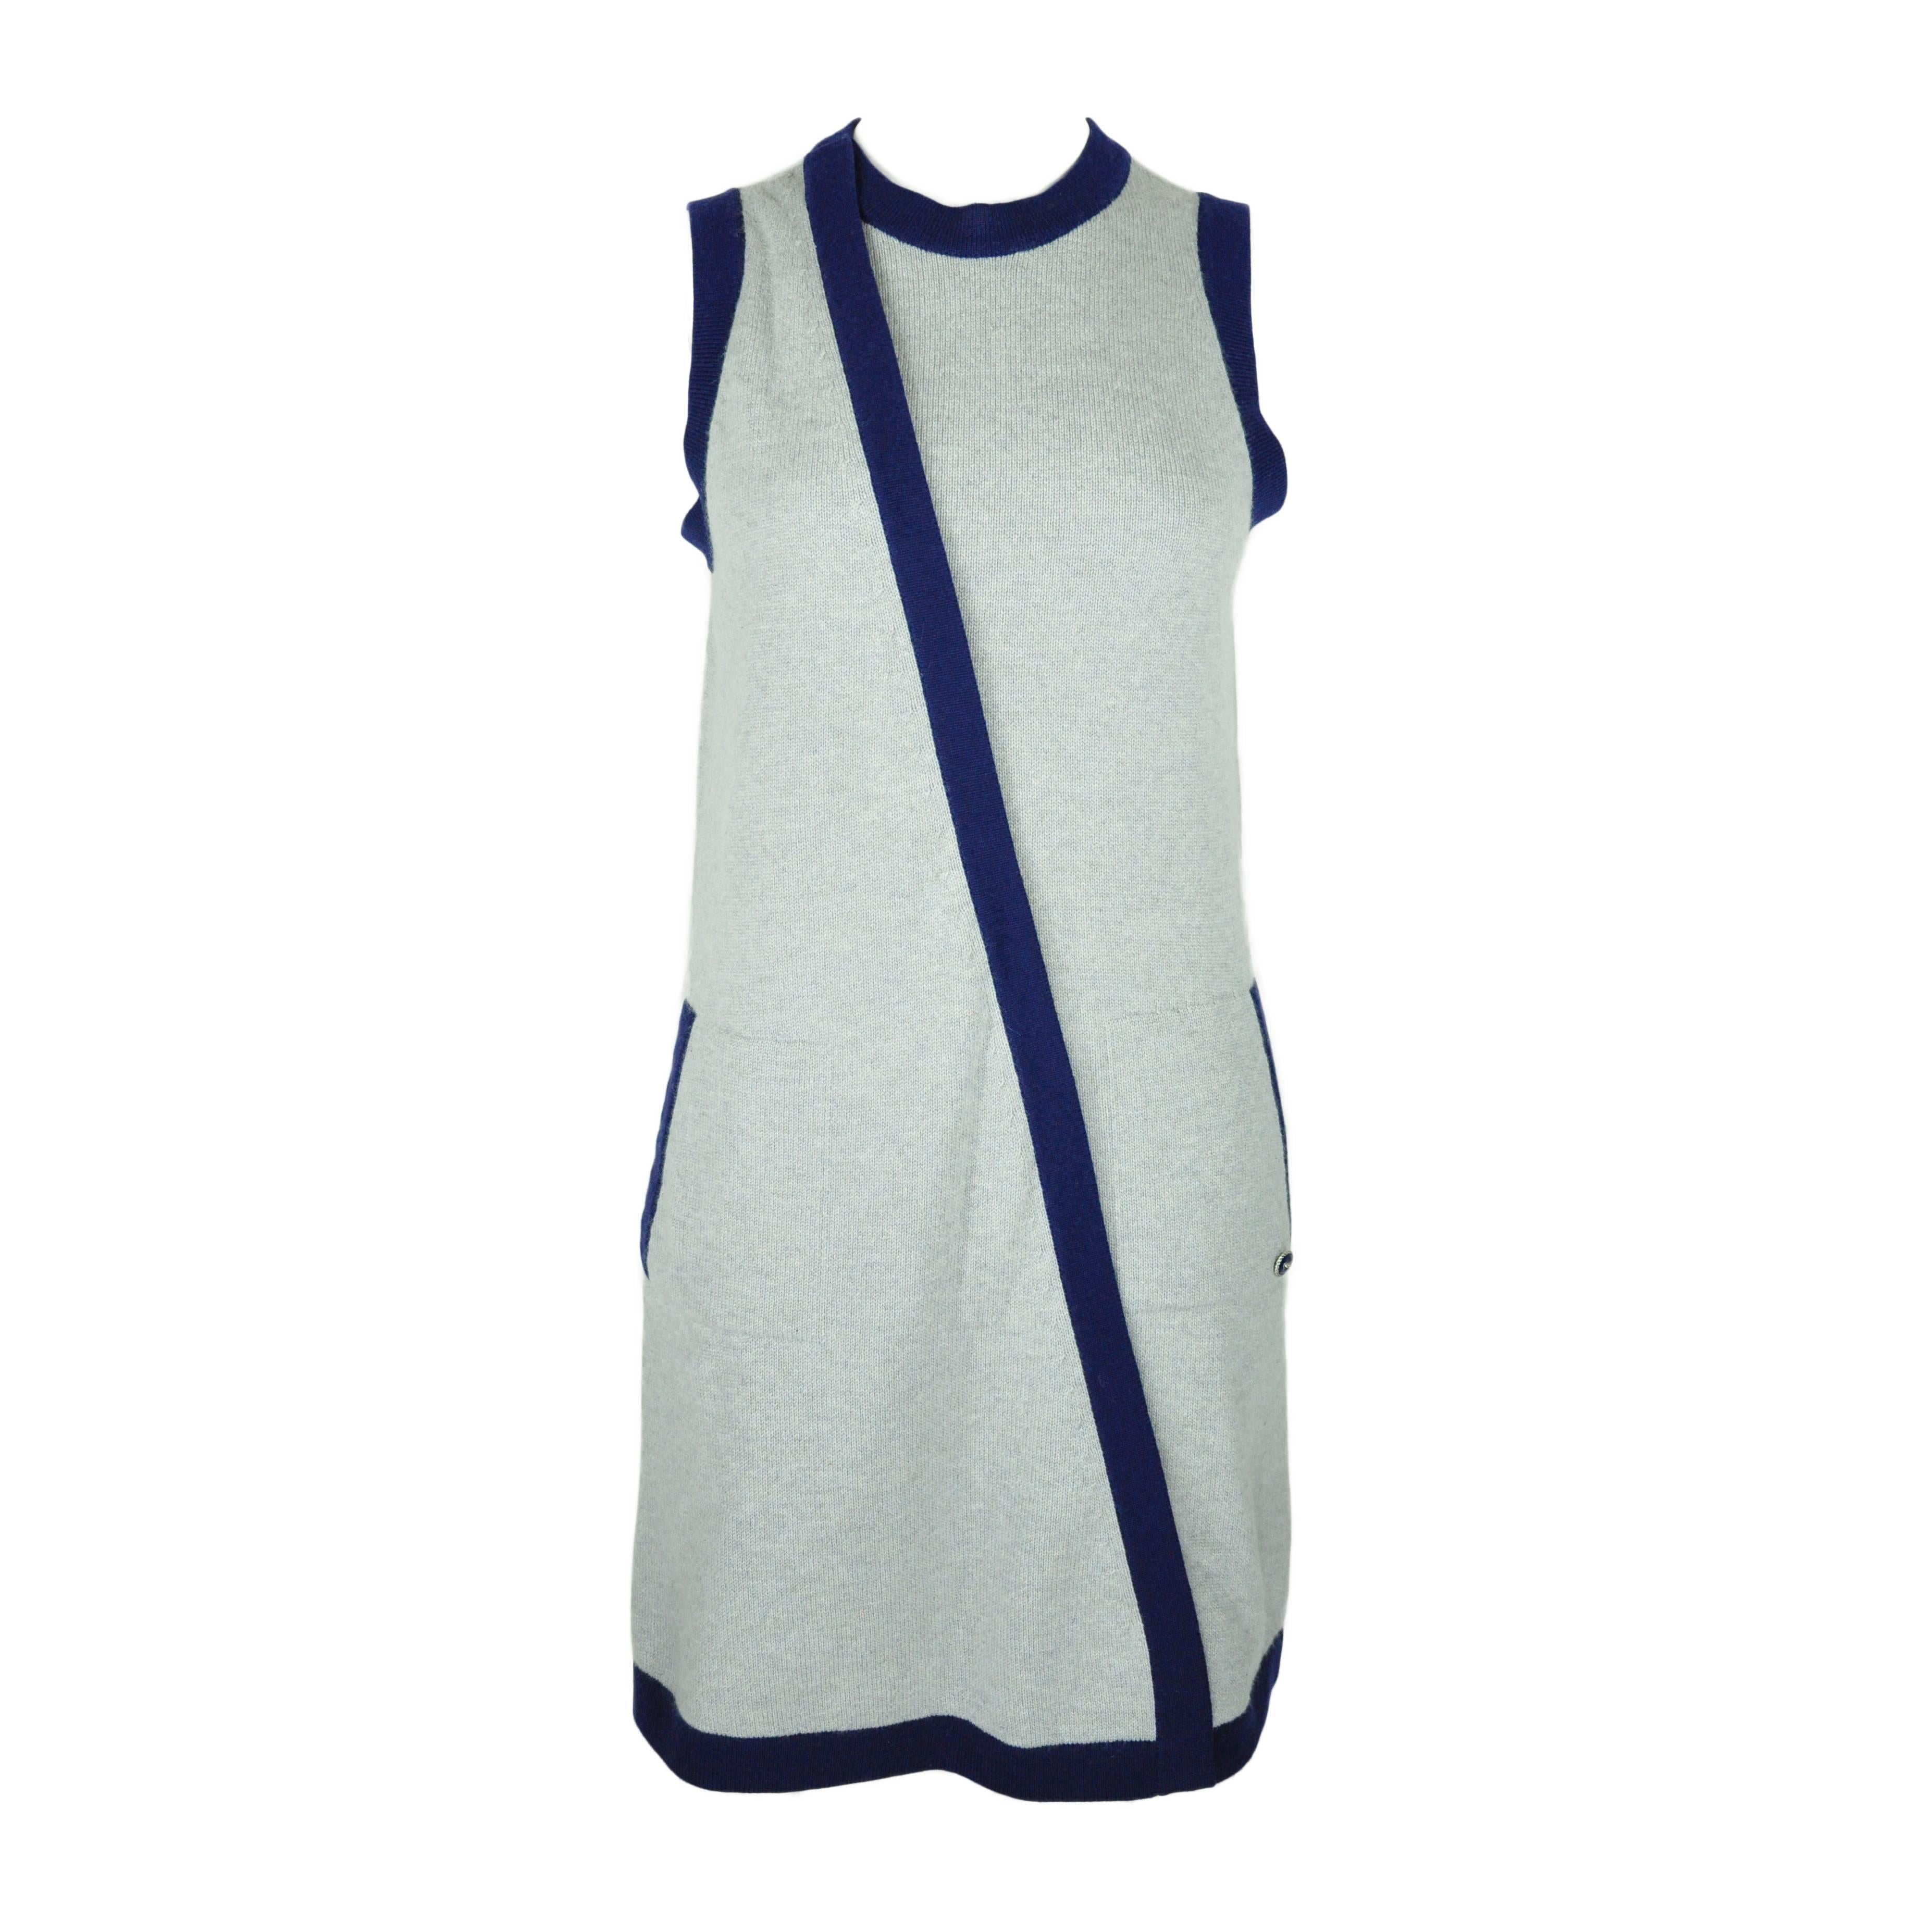 Chanel 2015 S/S Runway Collection Sleeveless Cashmere Knit Dress FR36